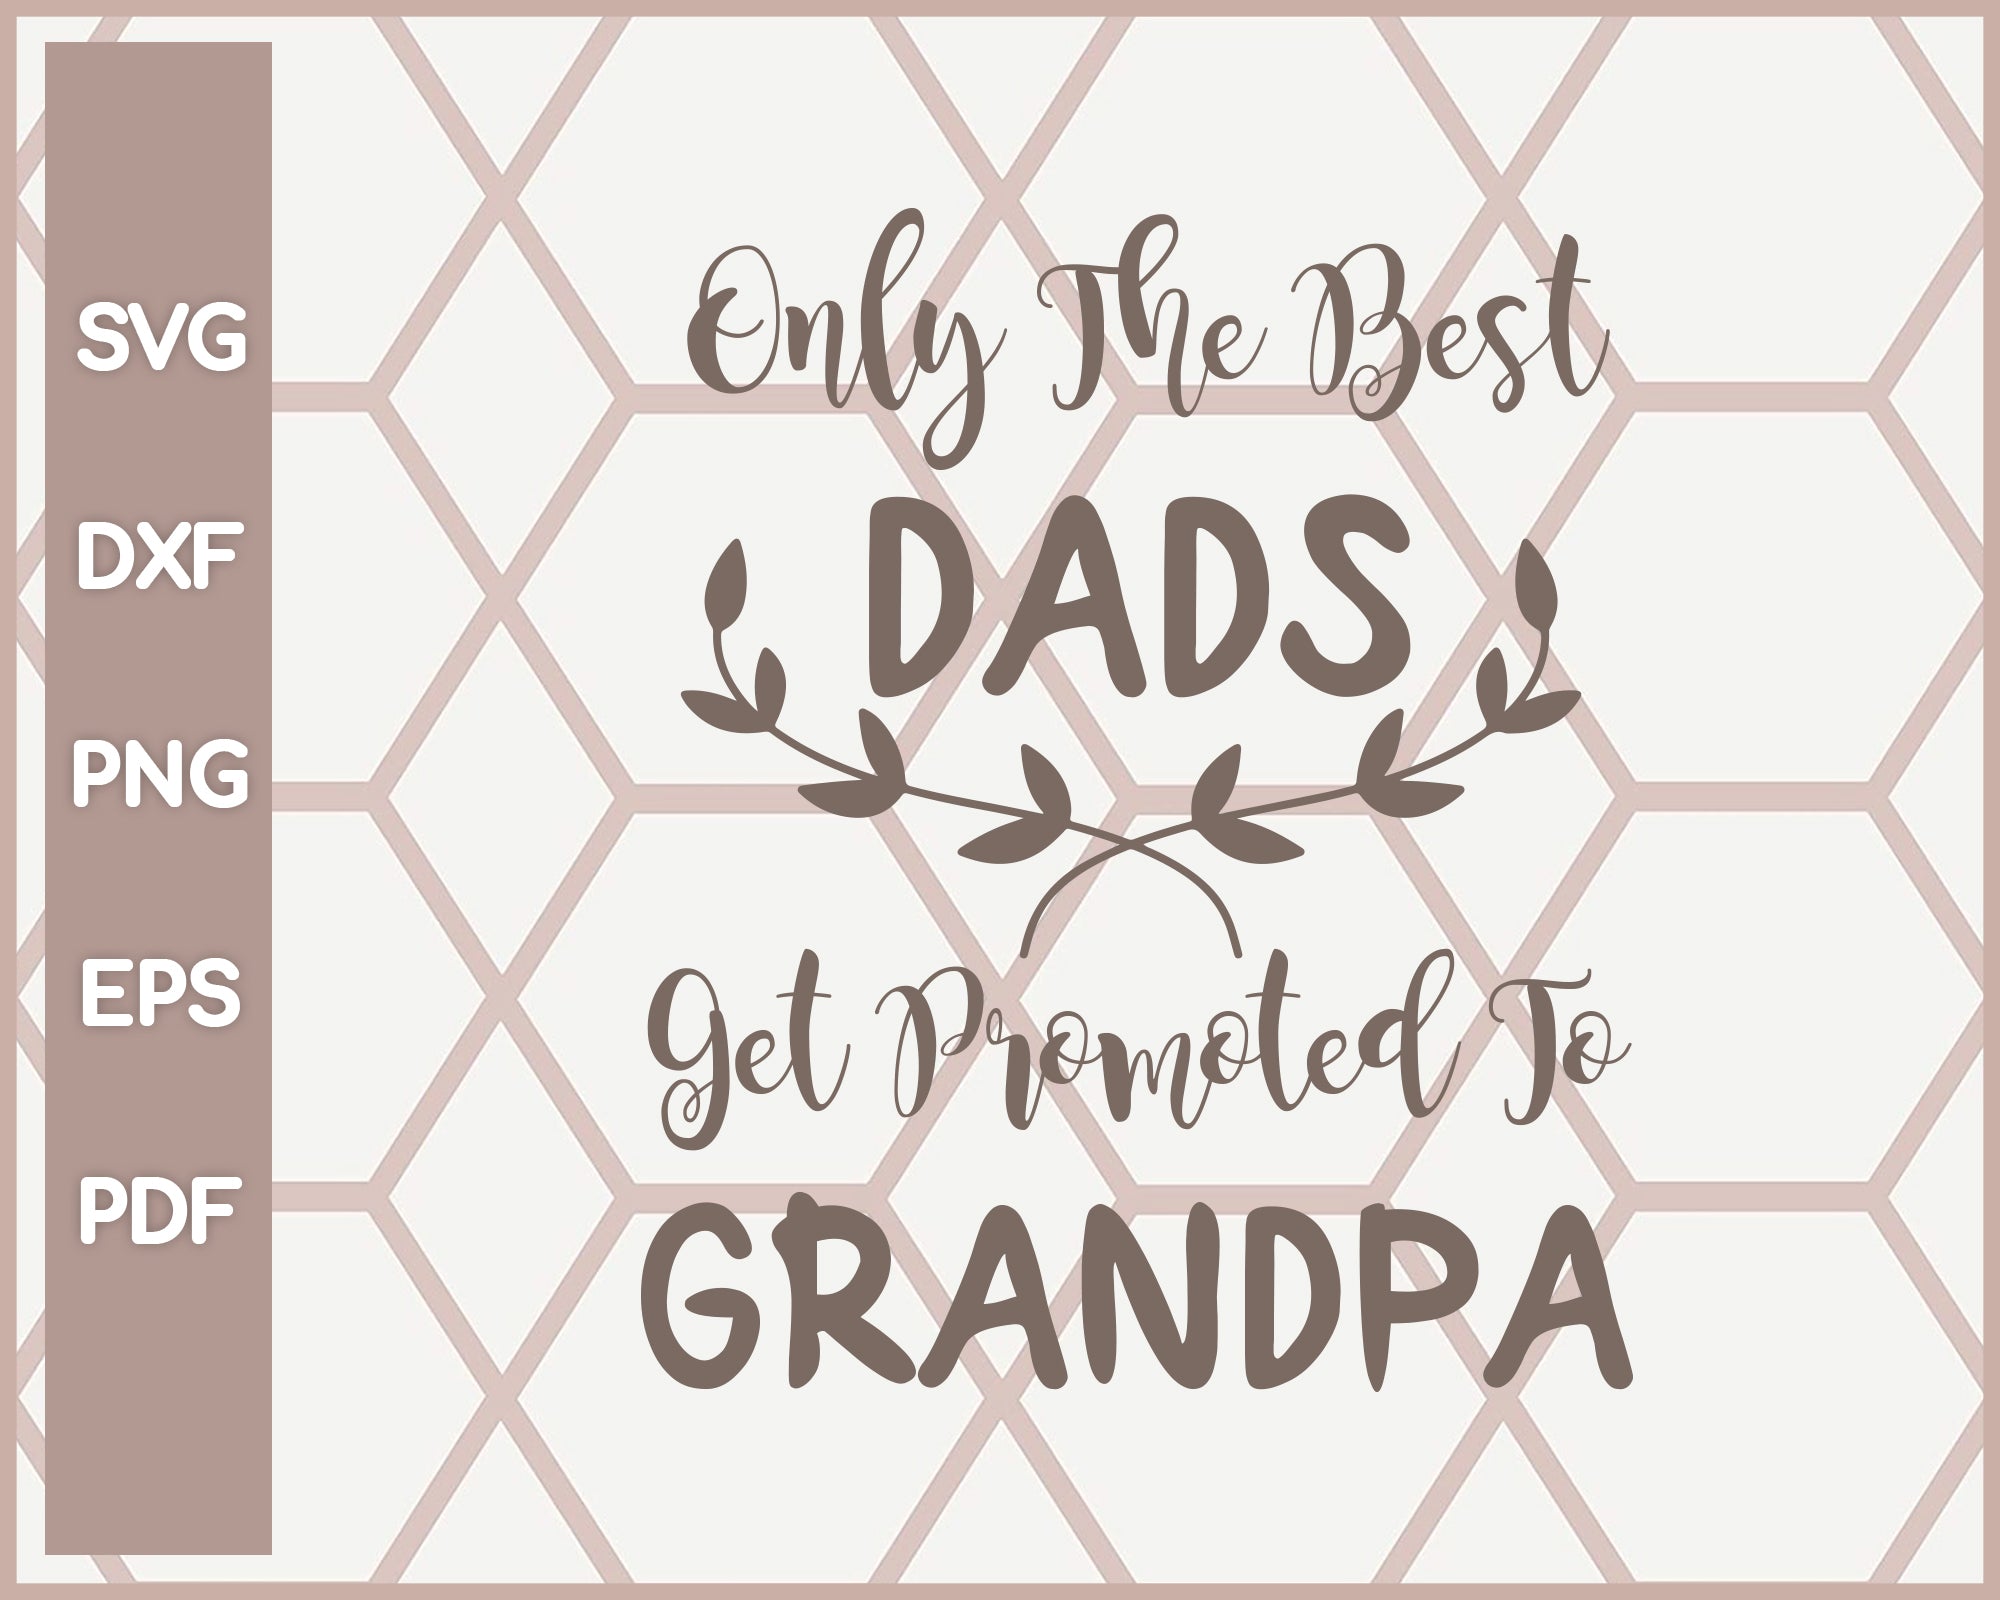 Only The Best Dads Get Promoted to Grandpa Funny svg Cut File For Cricut Silhouette And eps png Printable Artworks